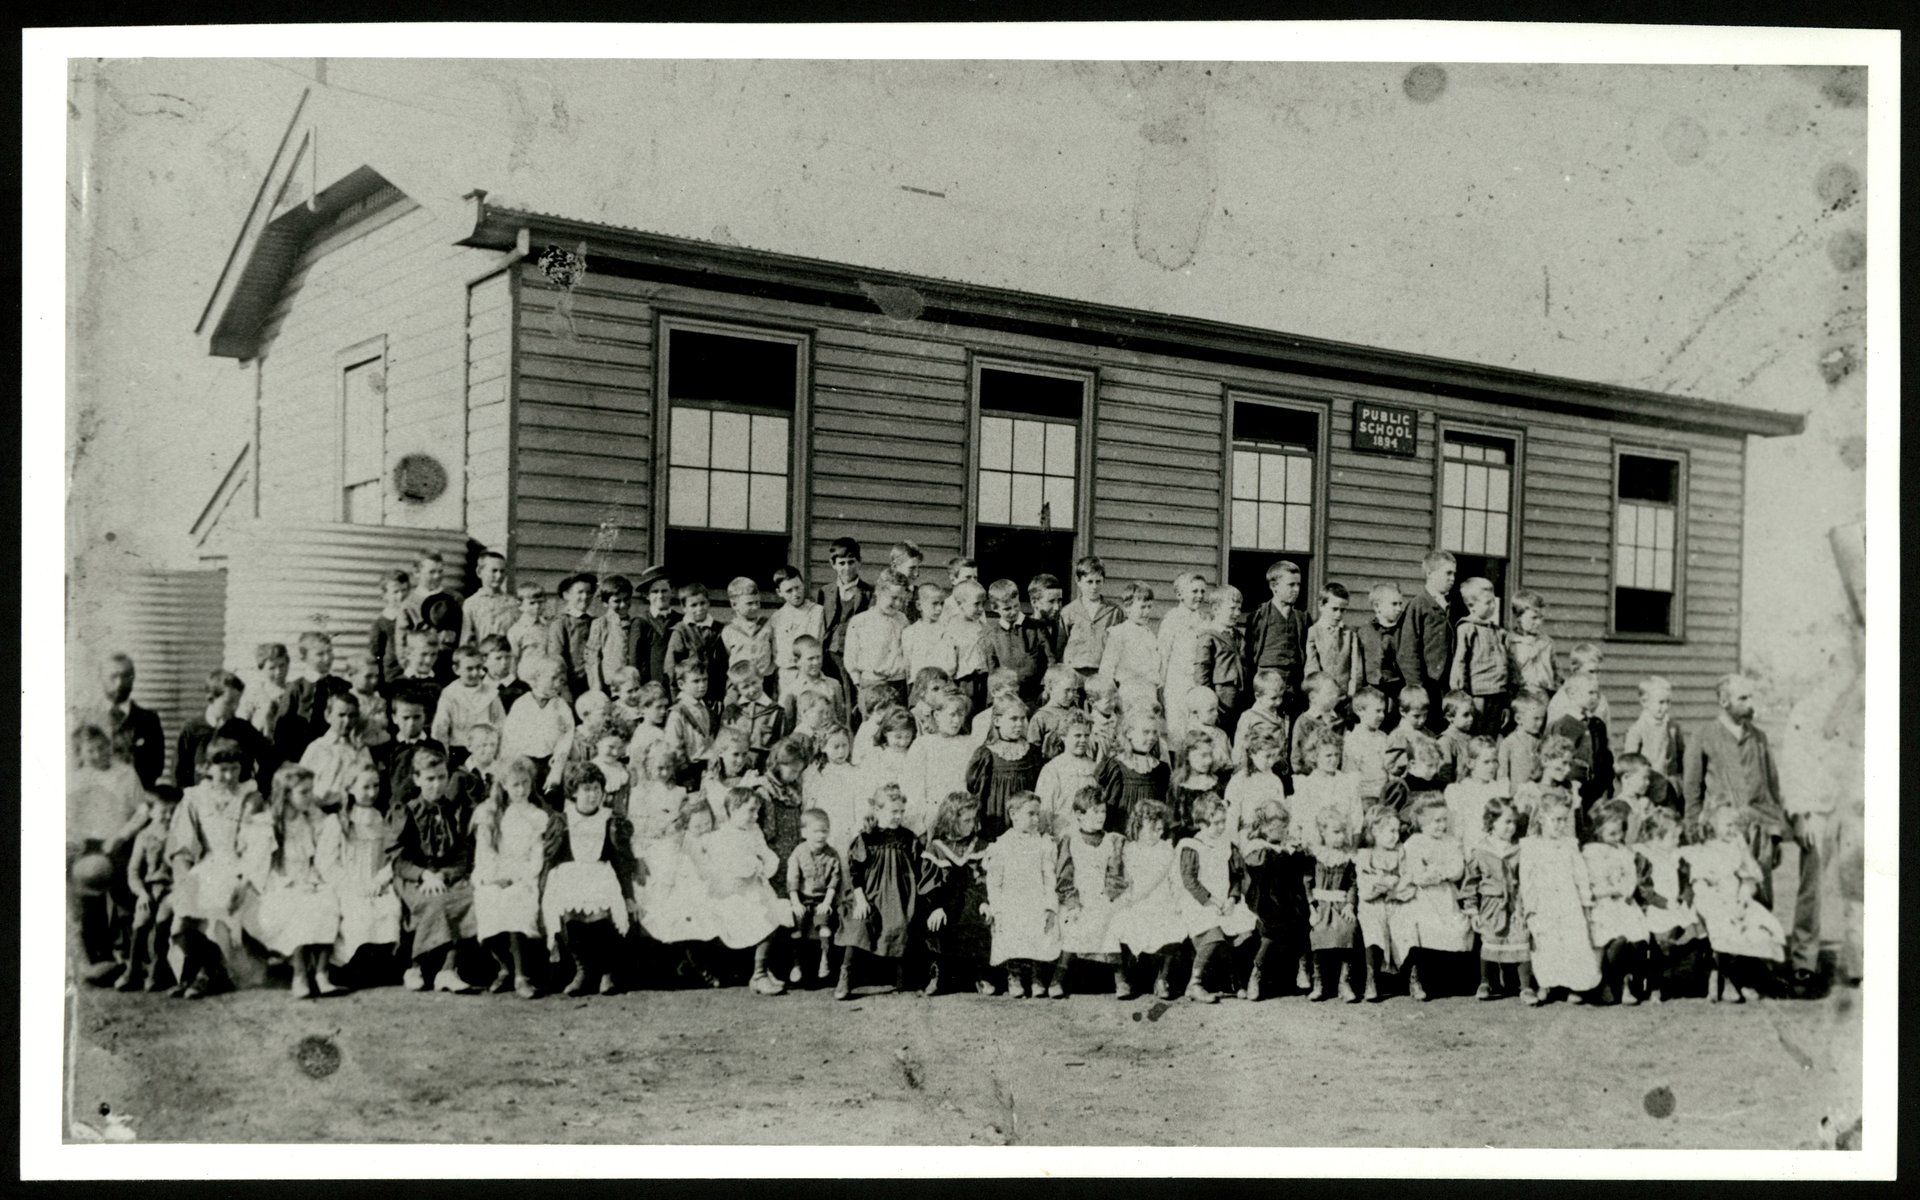 Students pose for photo in front of school building